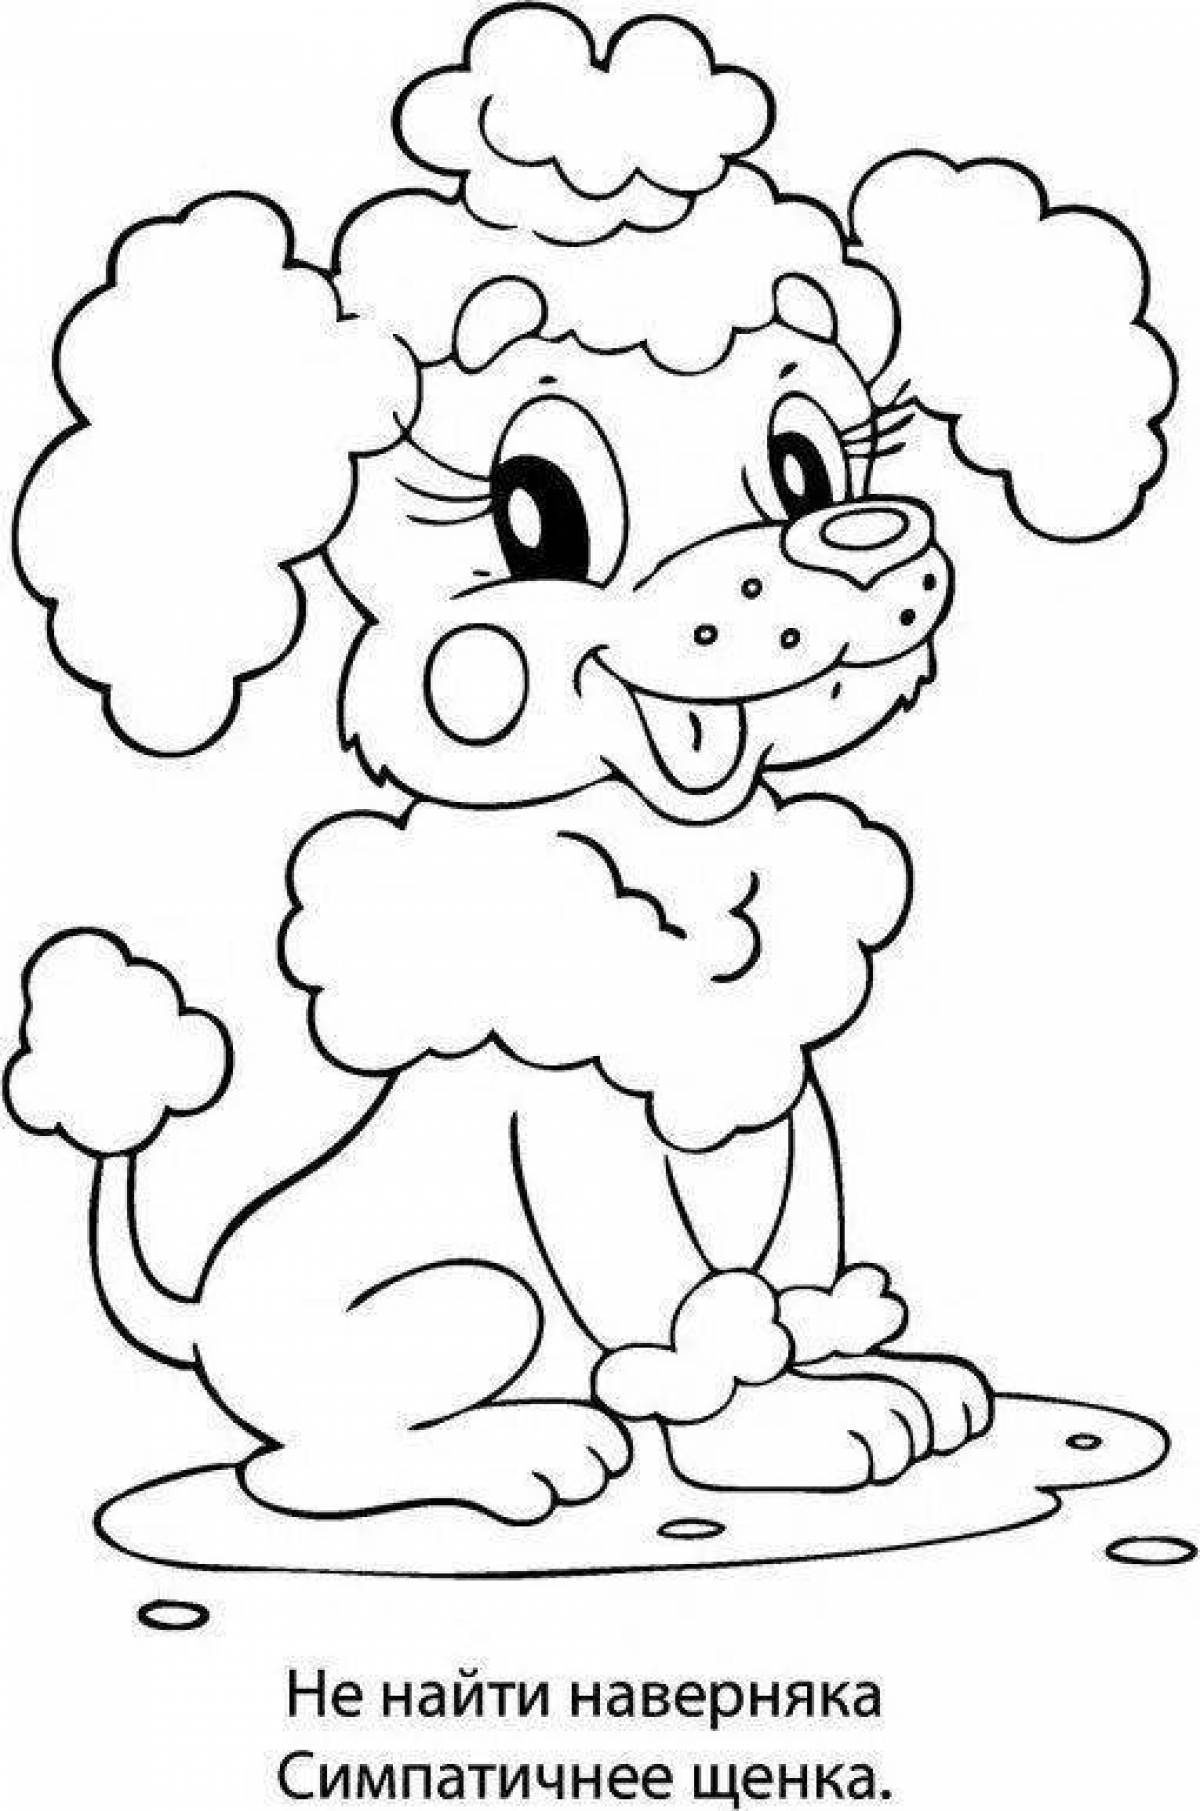 Adorable pink elephant coloring page